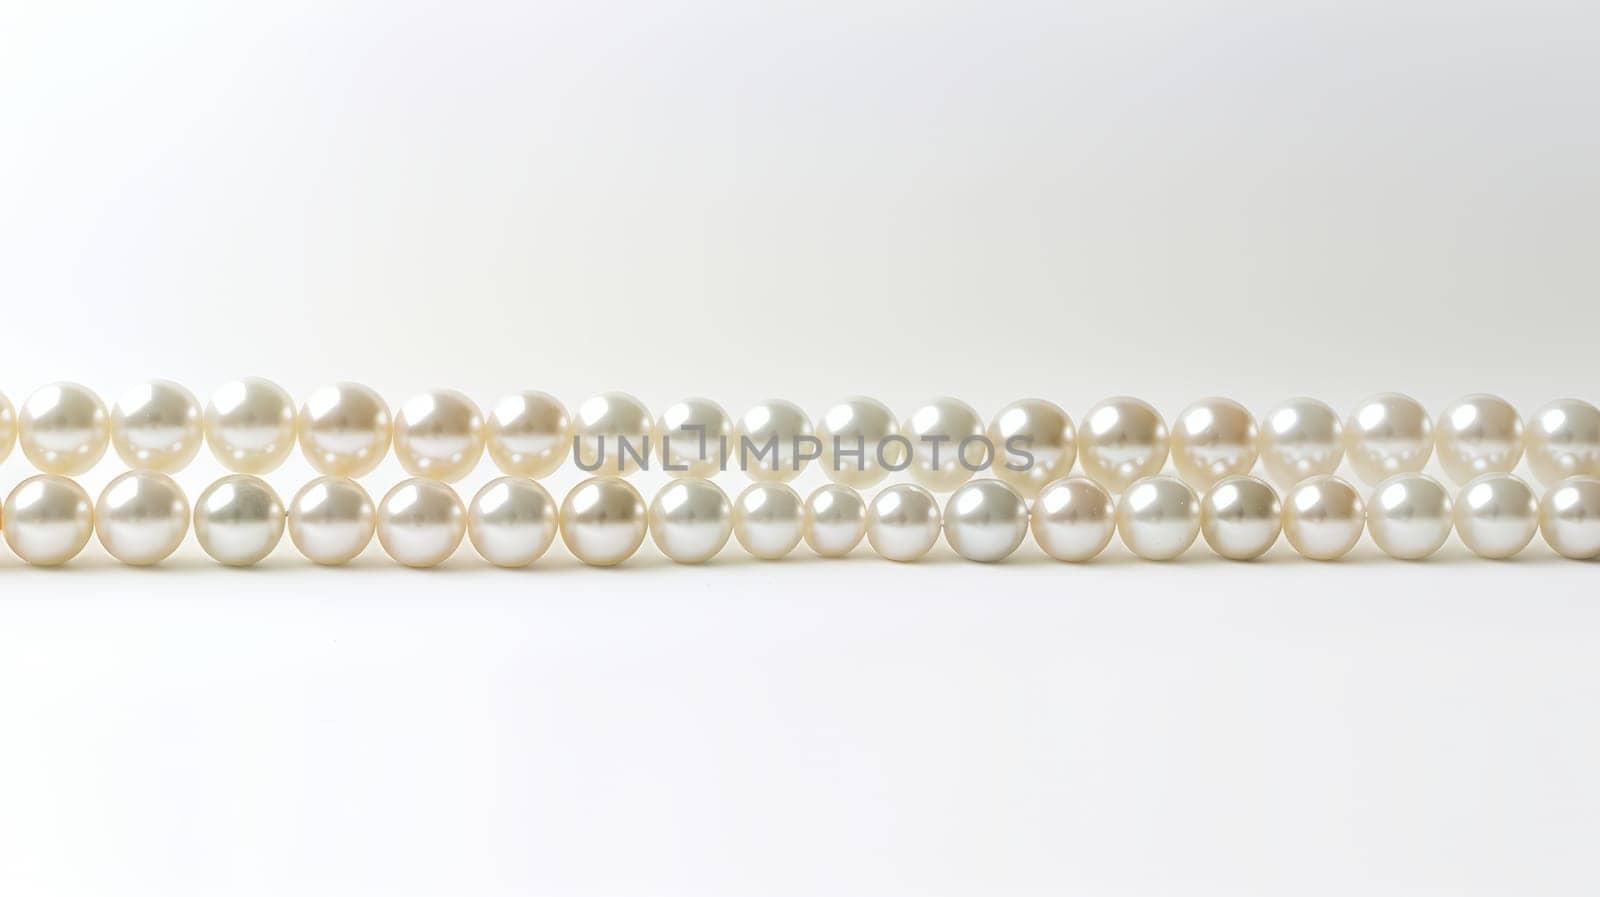 String of pearls on white background. White and round pearls with iridescence. Pearls decrease in size towards the ends. Perfect for themes of elegance, luxury and beauty. by DogDrawHand